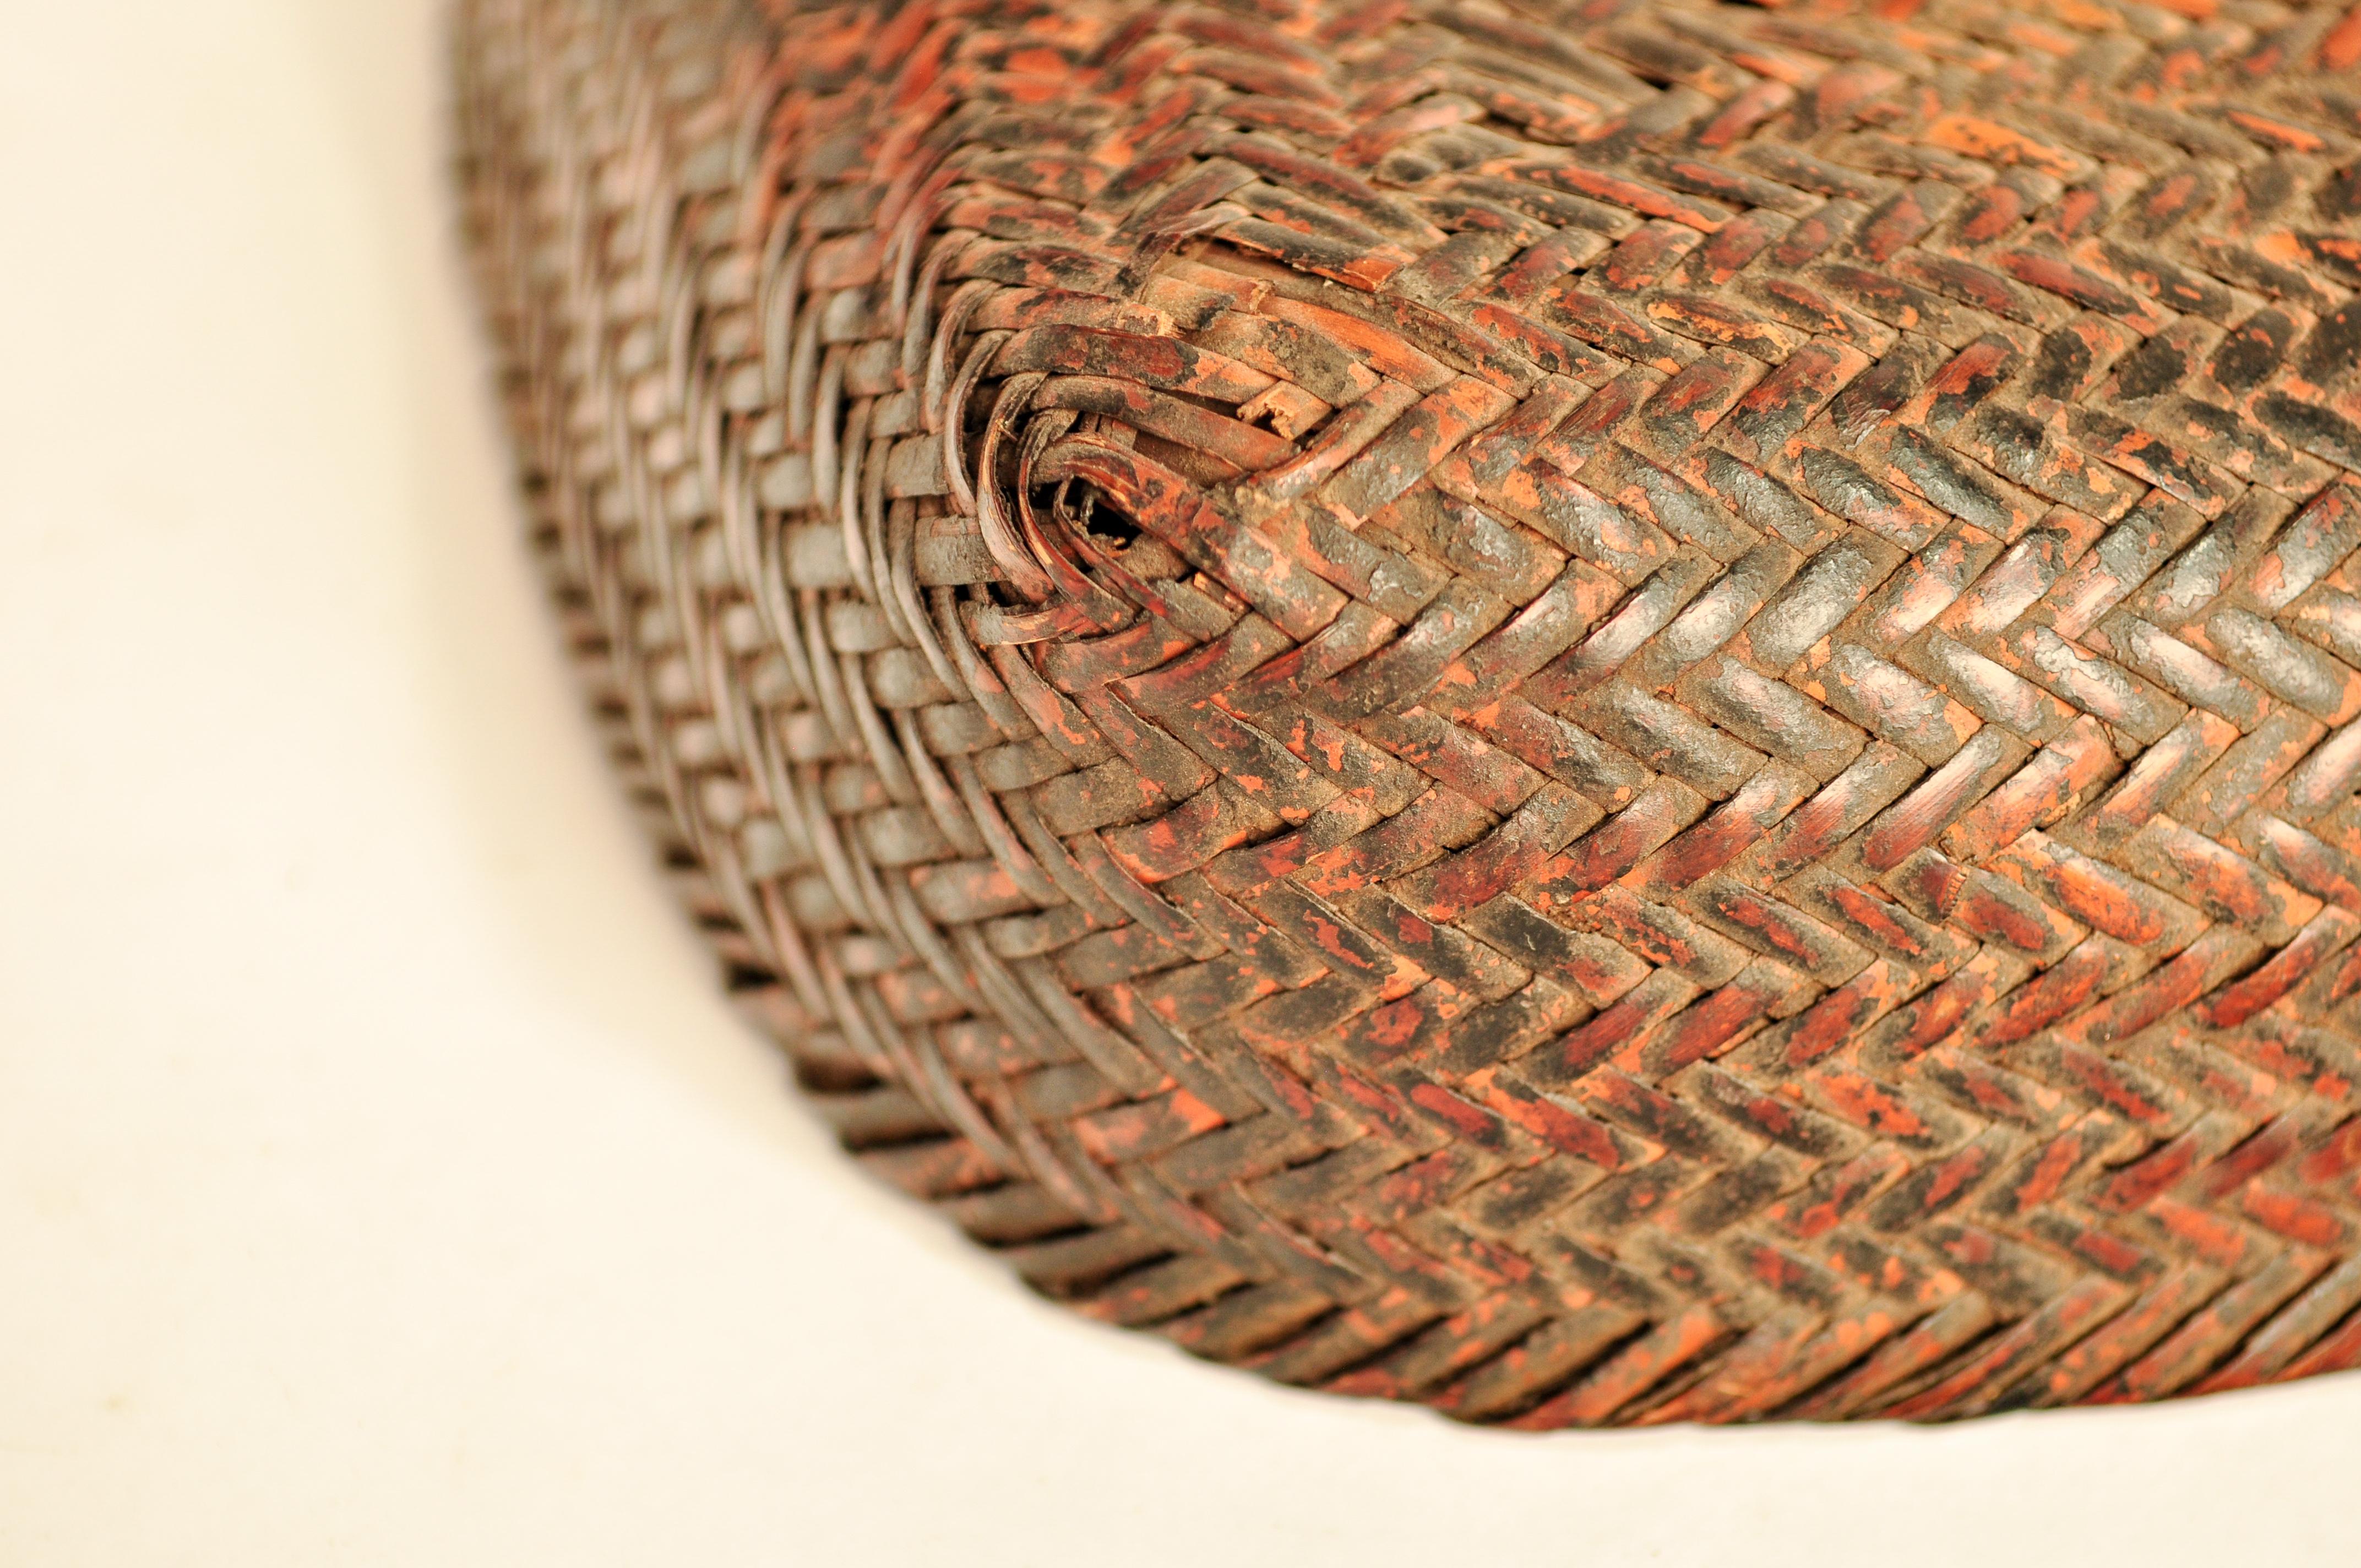 Rustic Tribal Storage Basket with Lid from the Tamang of Nepal, Mid-20th Century 8